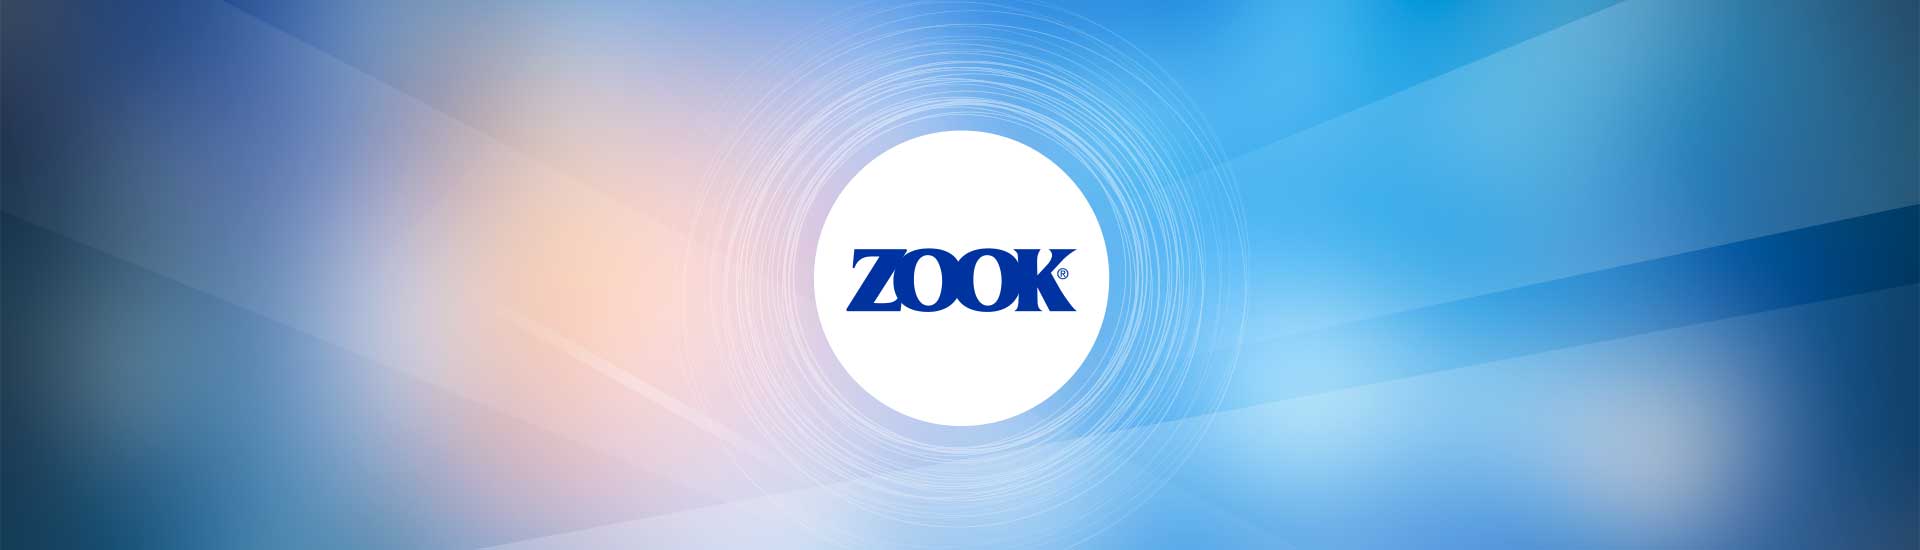 Applicable Zook Products Certified to ASME BPVC 2021, Section XIII